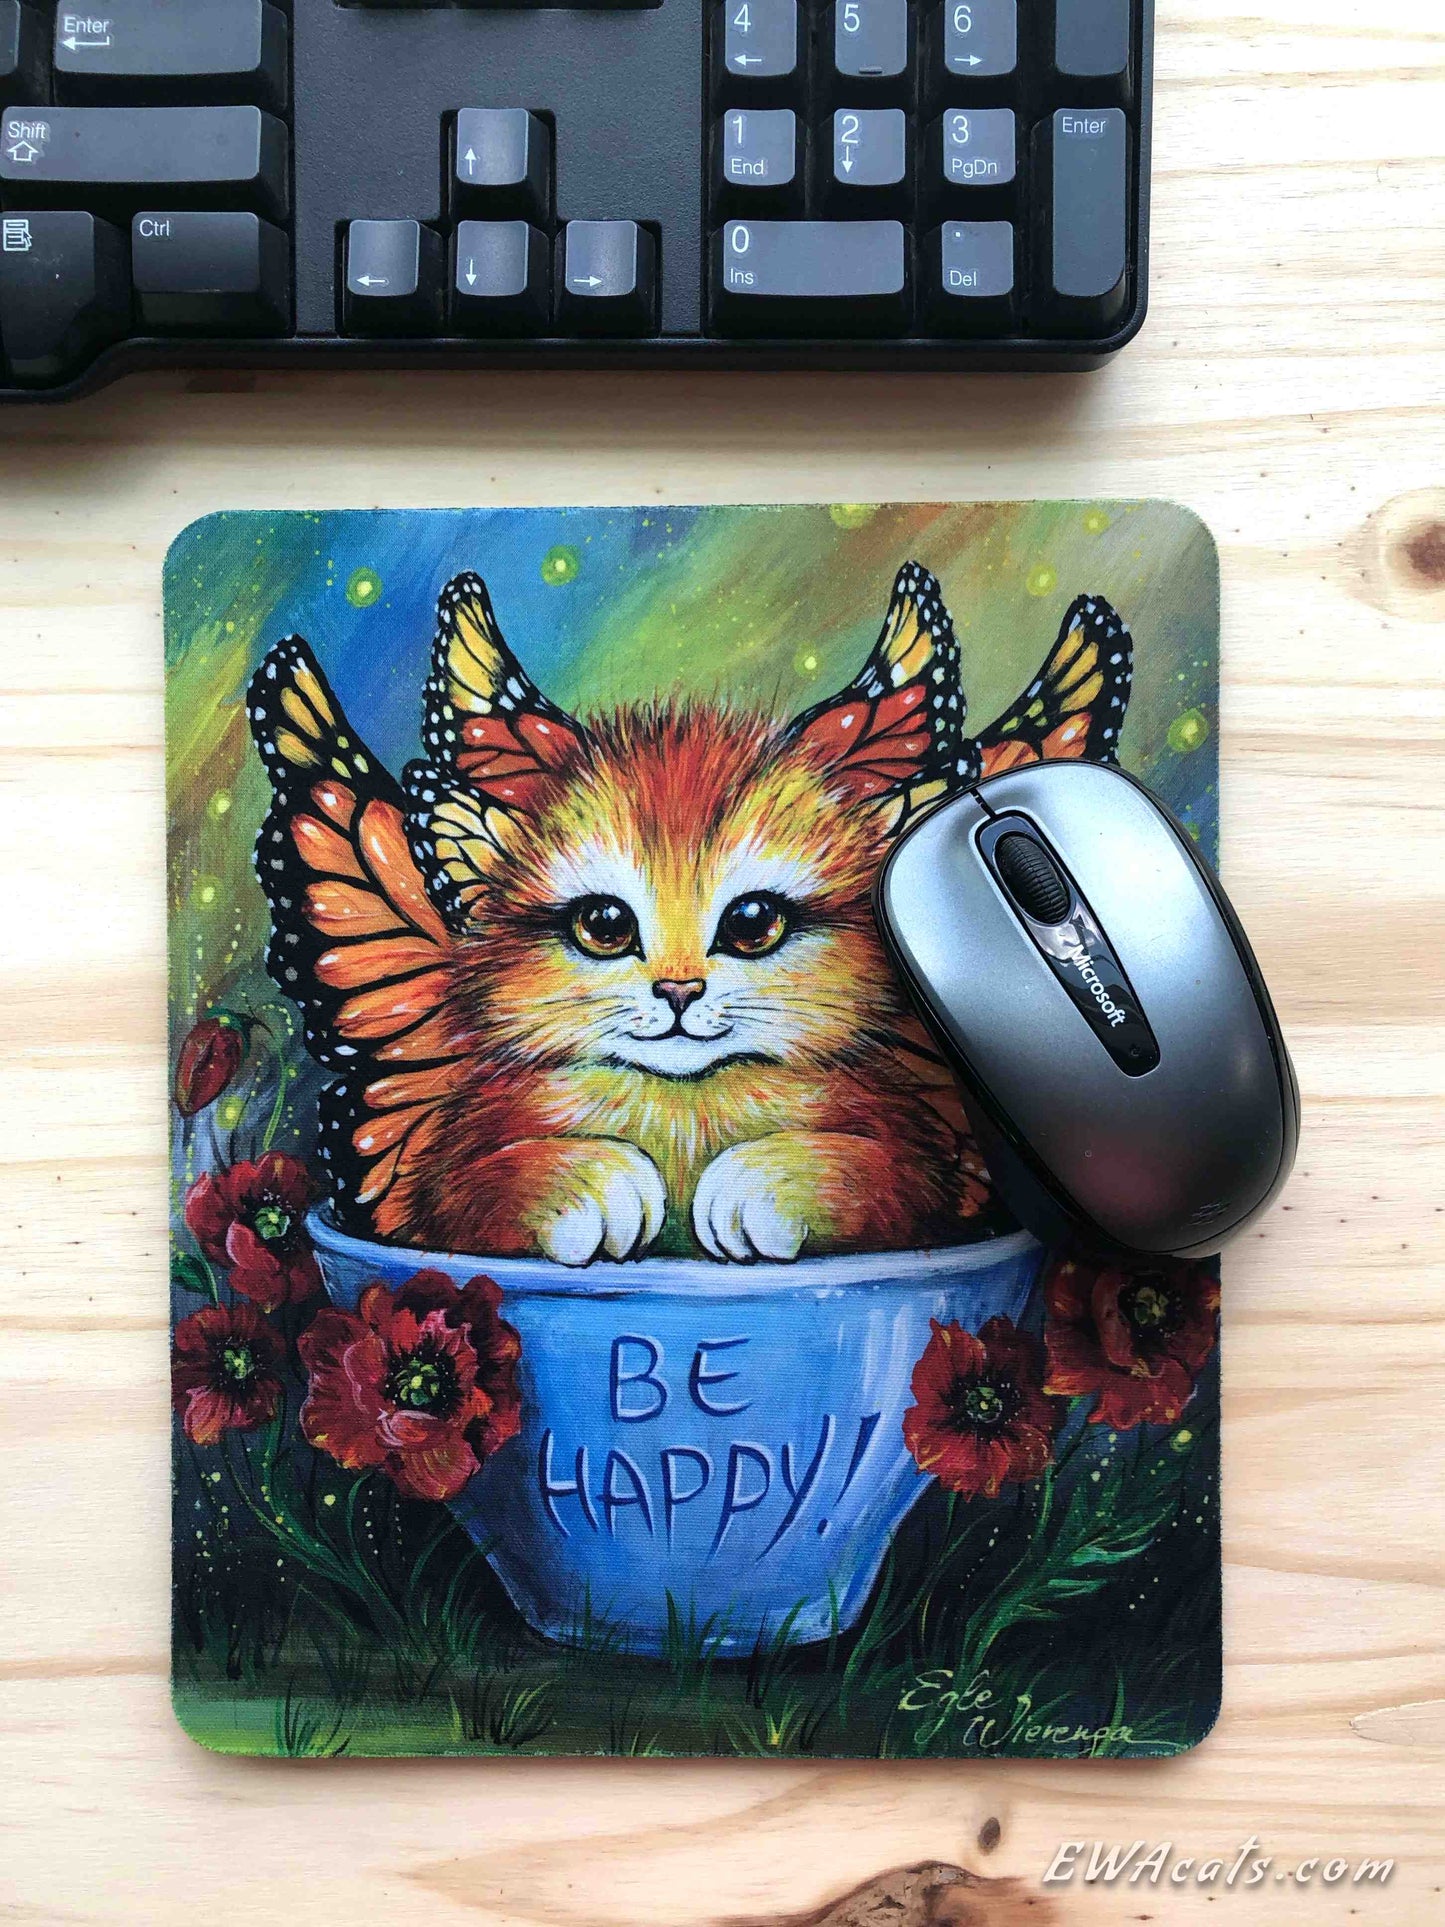 Mouse Pad "Be Happy!"